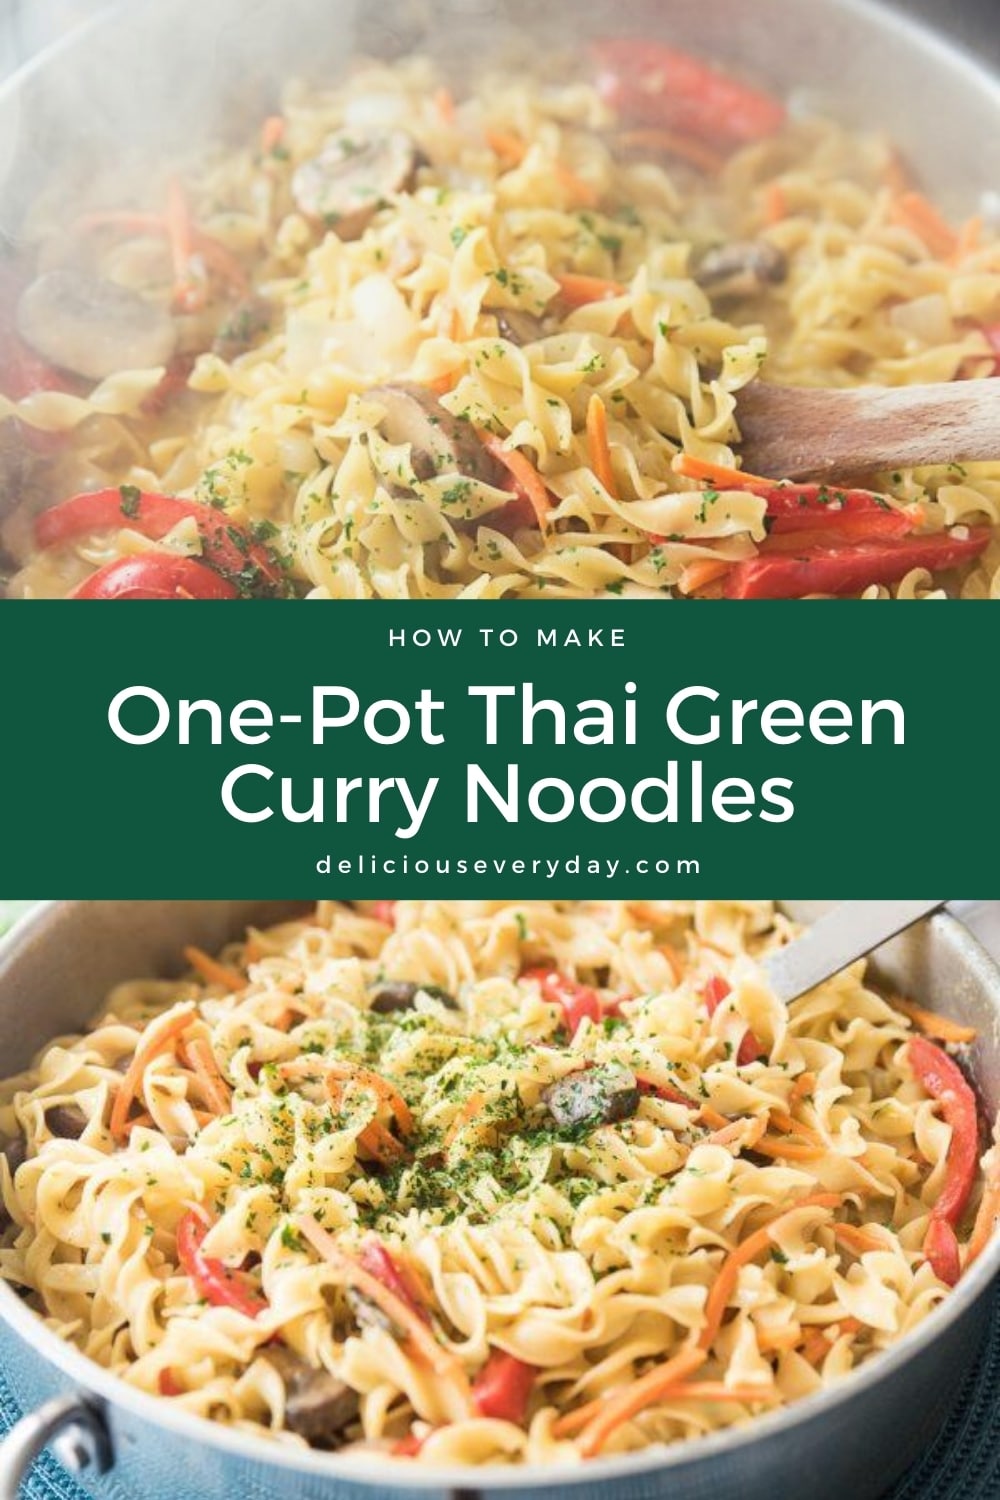 One-Pot Thai Green Curry Noodles | Vegetarian Pasta | Delicious Everyday